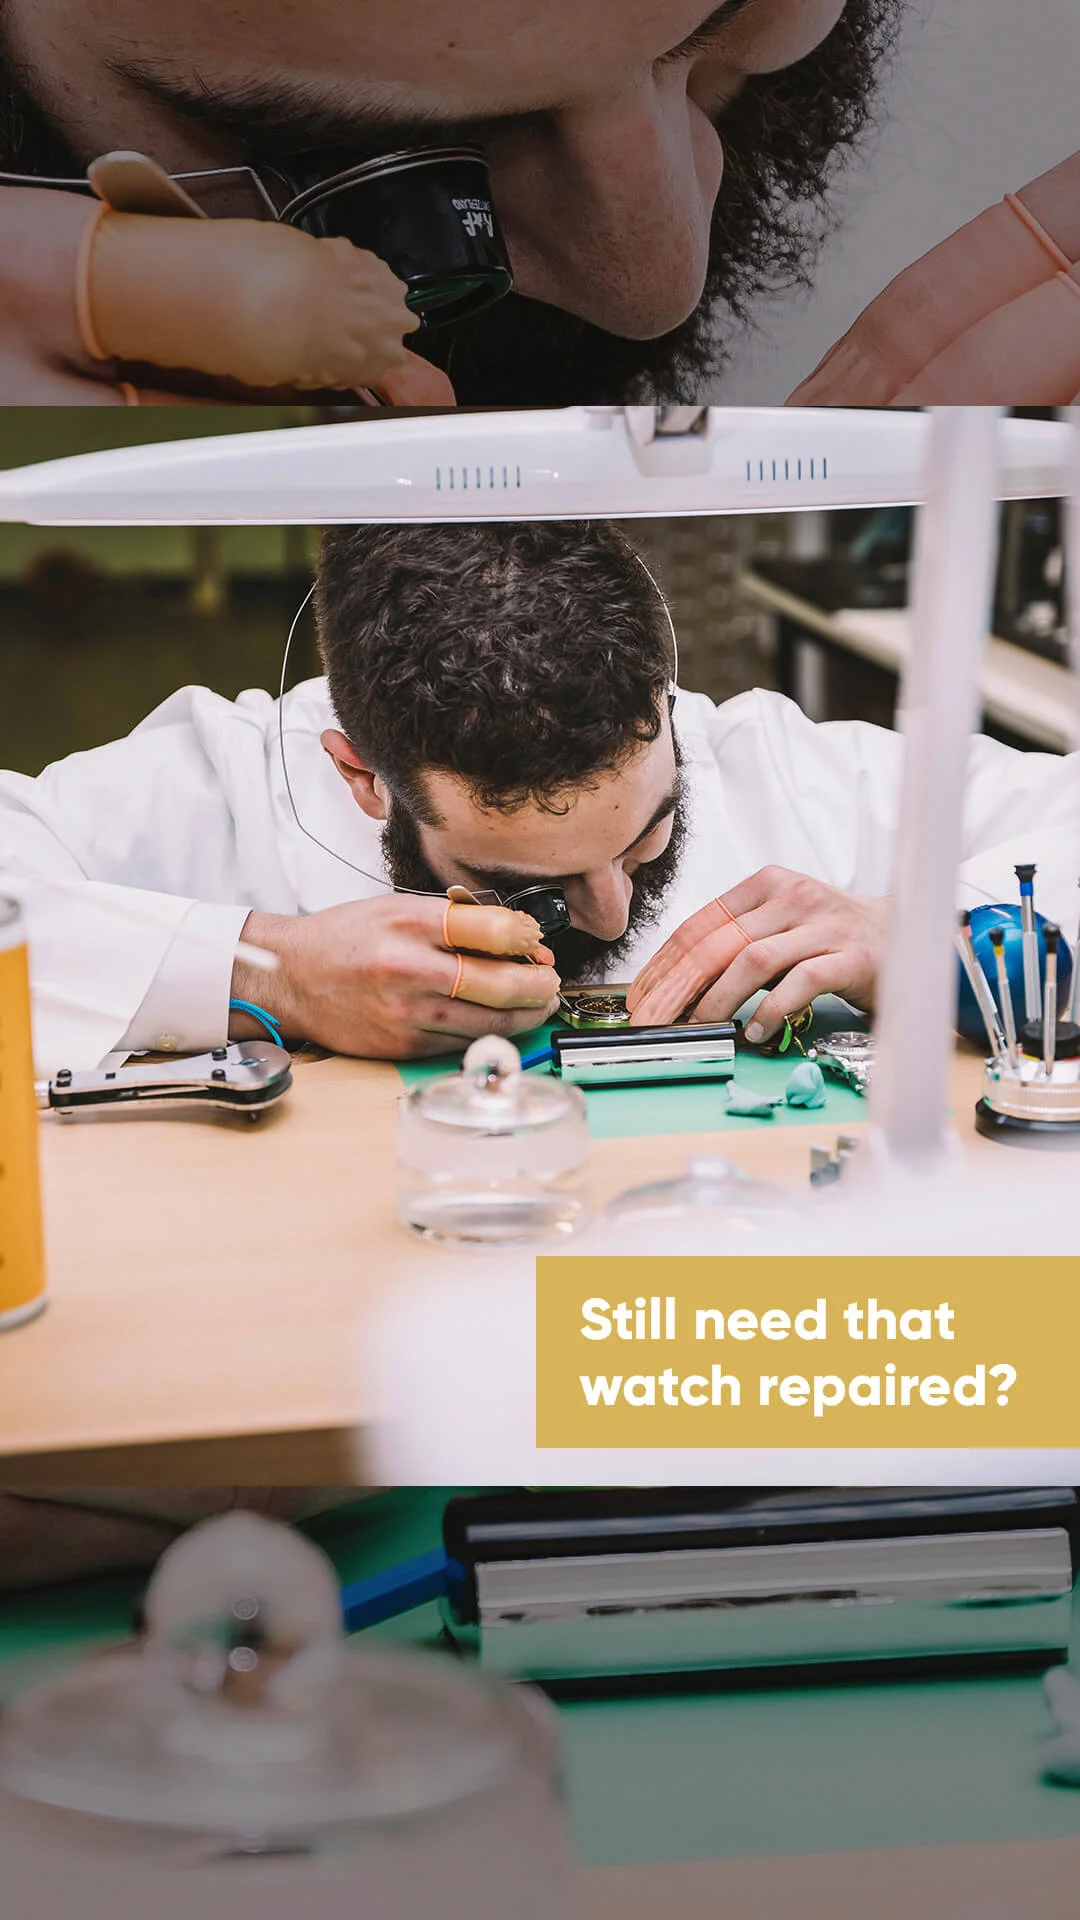 A man is focused on repairing a watch, using specialized tools and equipment